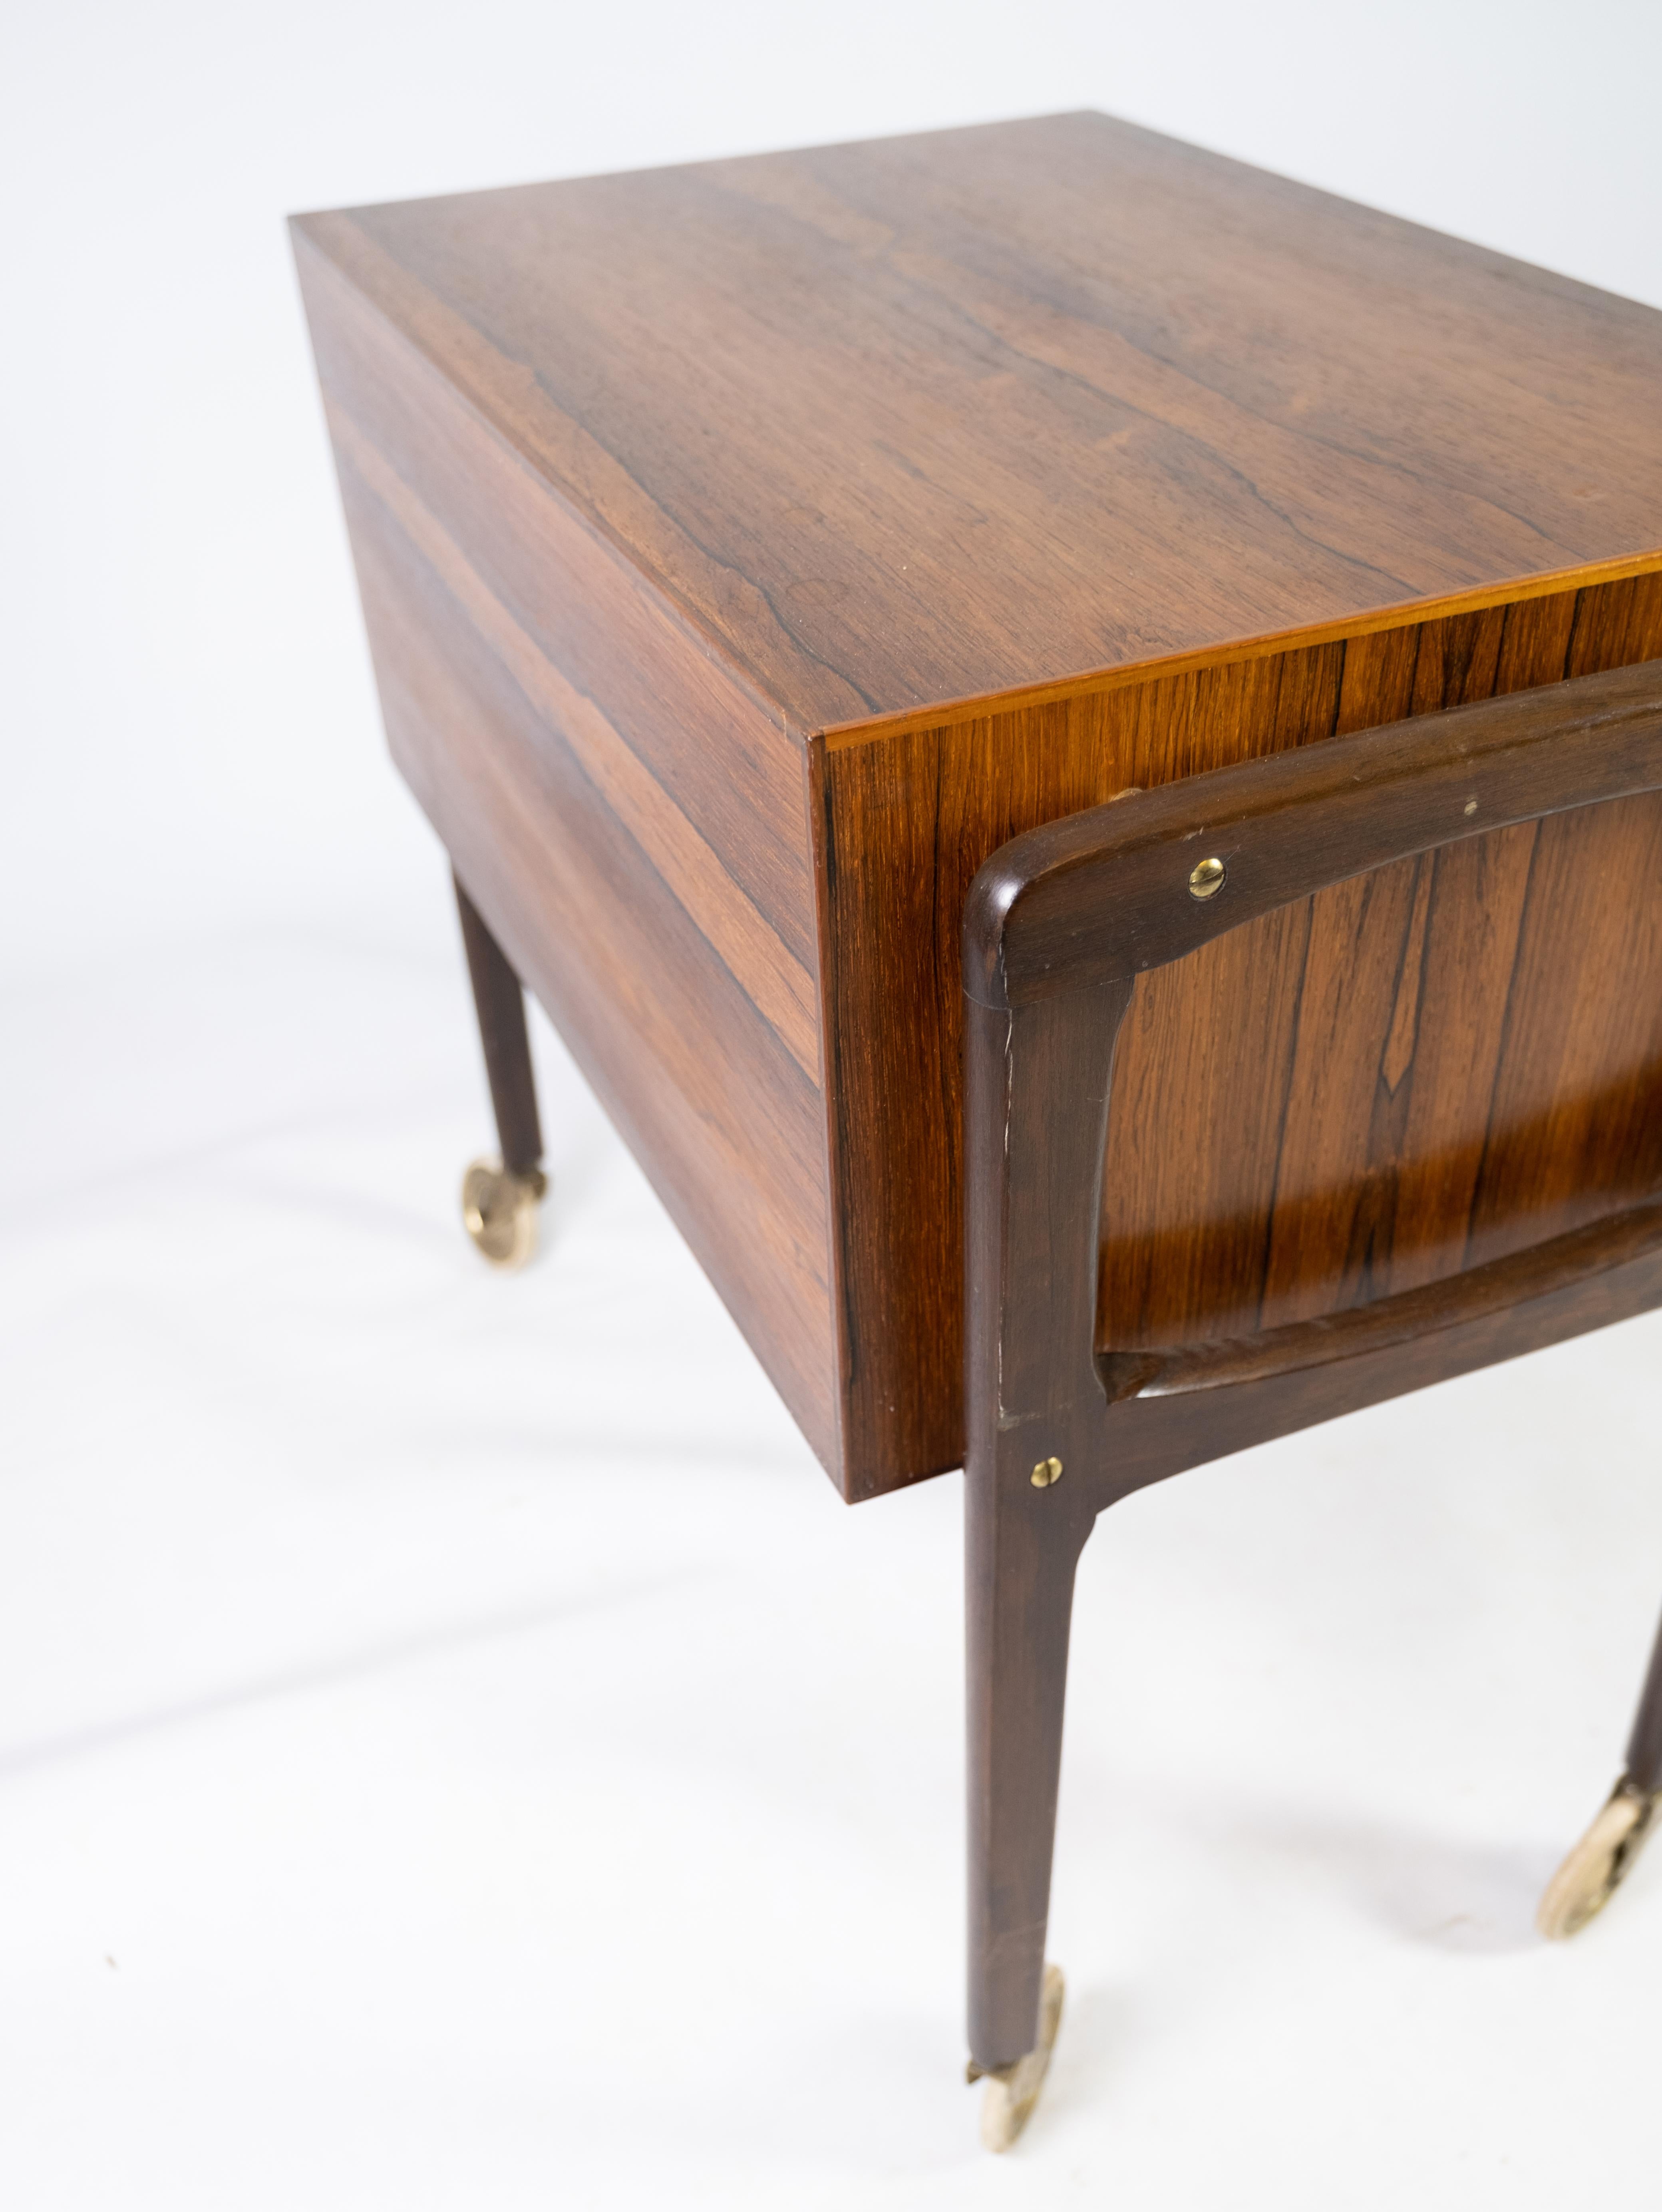 Mid-20th Century Small Chest of Drawers on Wheels in Rosewood of Danish Design from the 1960s For Sale